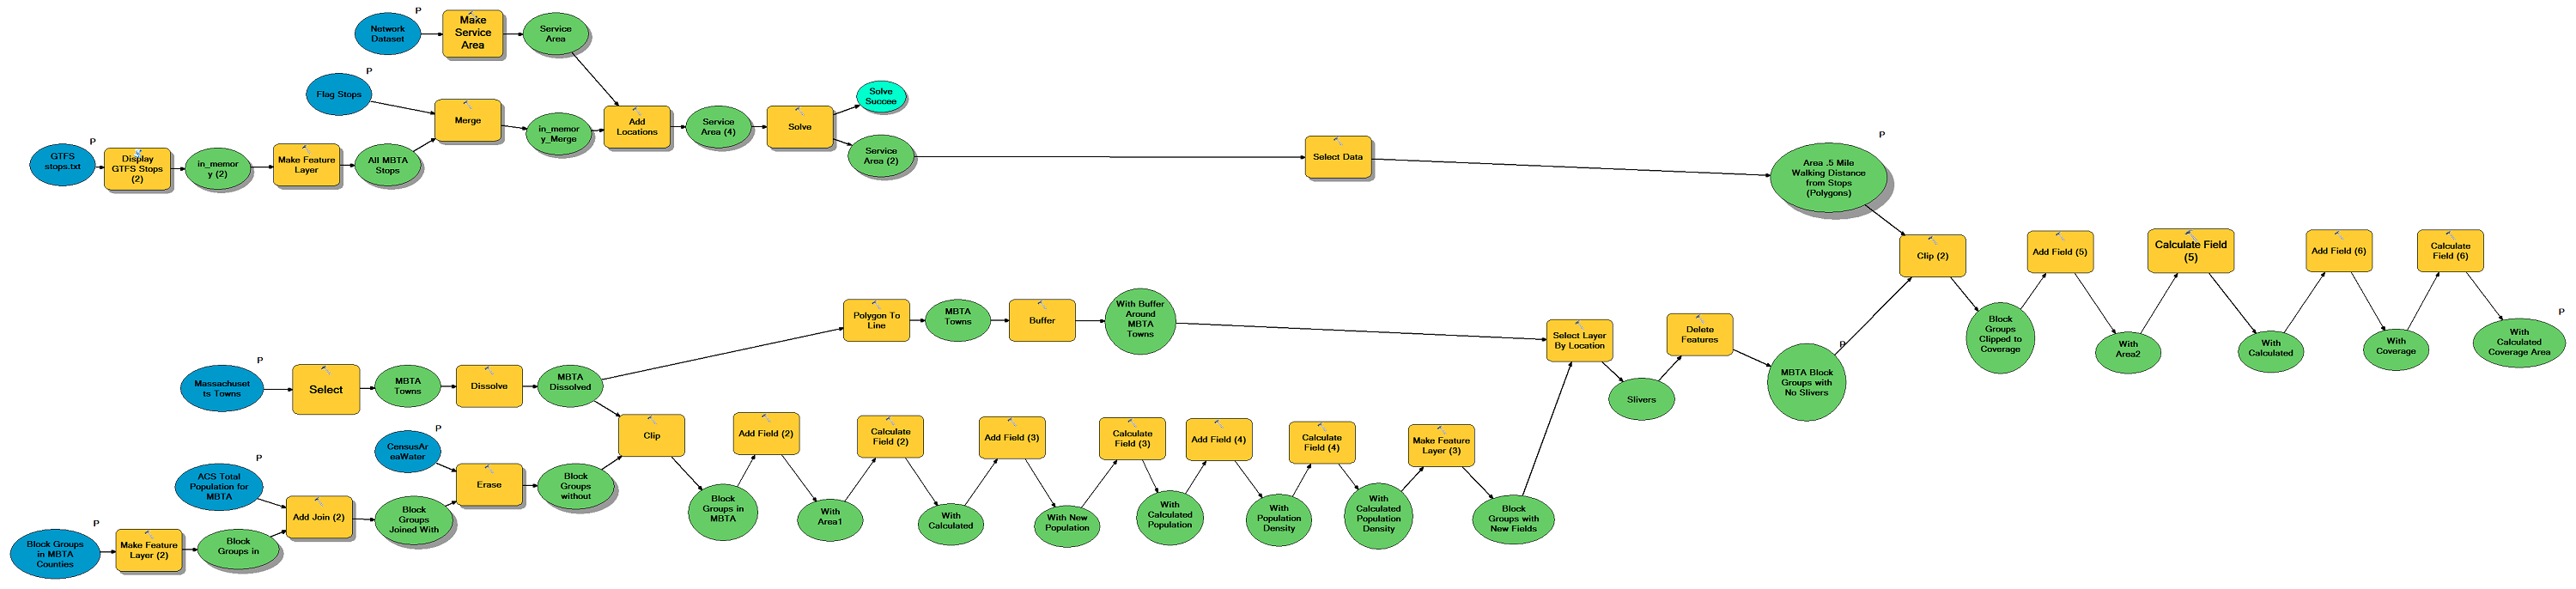 Flow Chart from ArcMap ModelBuilder showing the coverage model